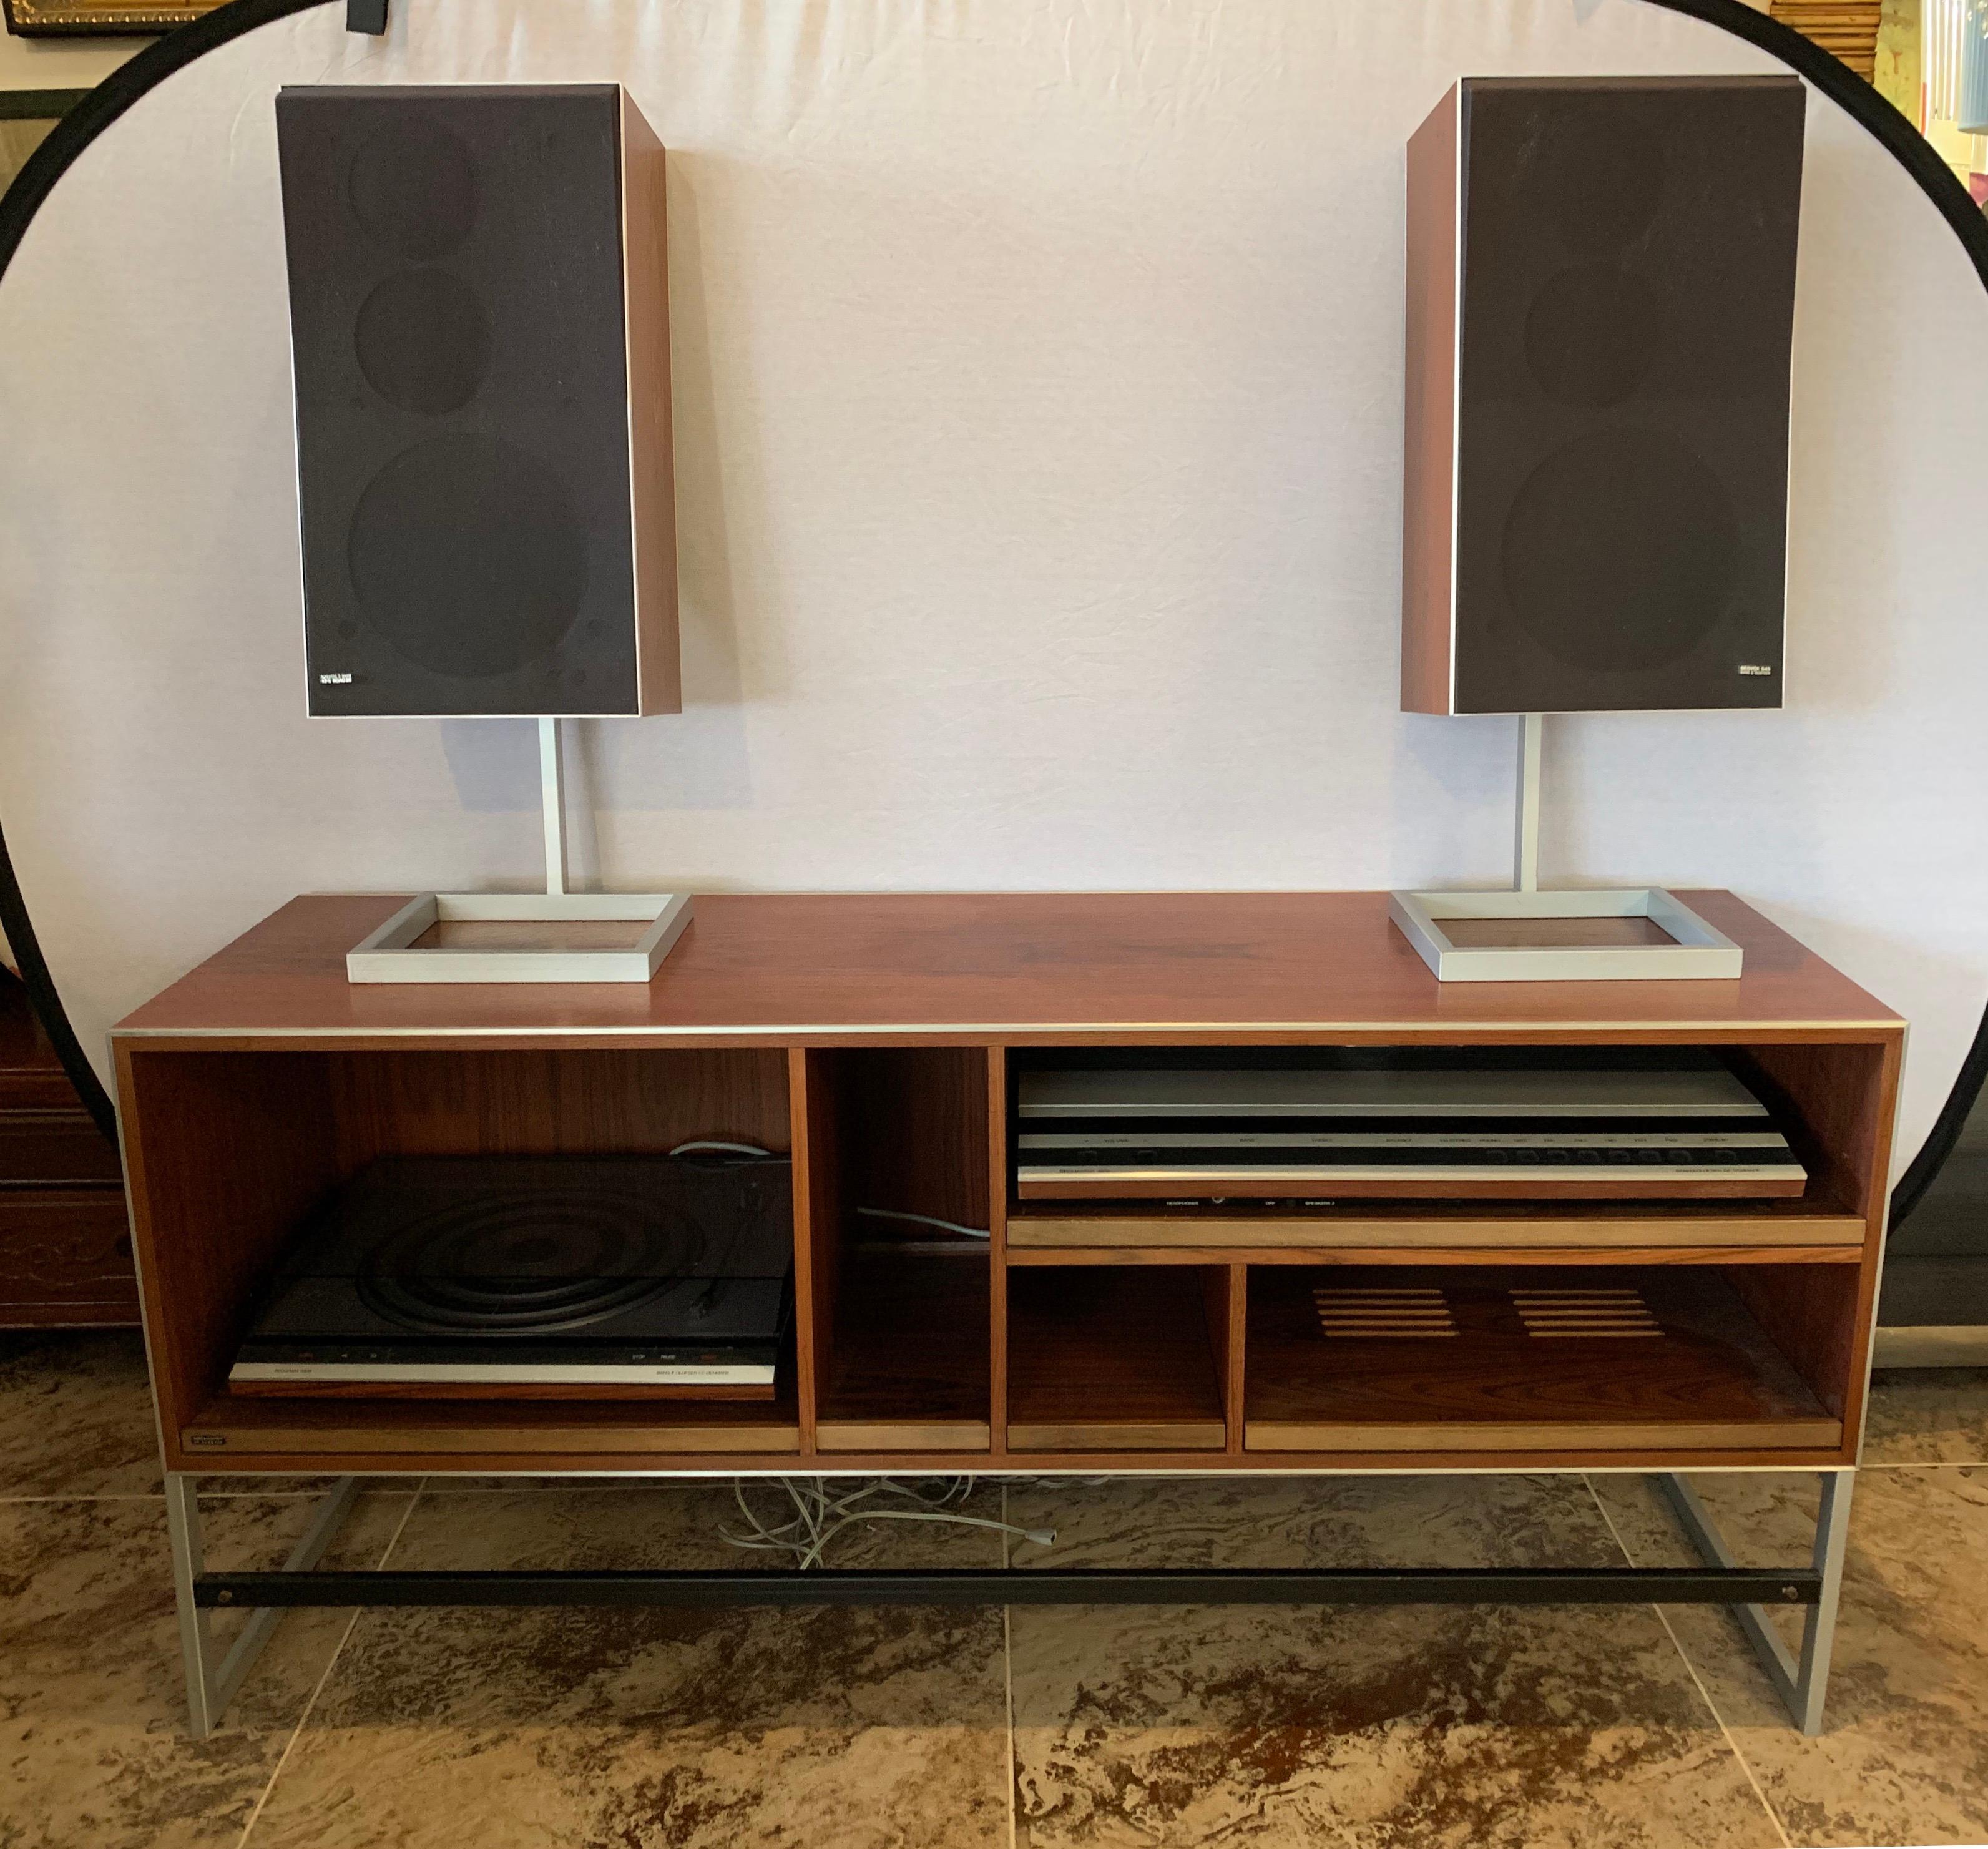 Rare Bang & Olufsen Jacob Jensen designed Danish cabinet with Beovox S45-2 speakers, Beogram 3404 turntable and Beomaster 1900 receiver. The cabinet and components all for one price. Everything works as it should and condition is very good. All Bang